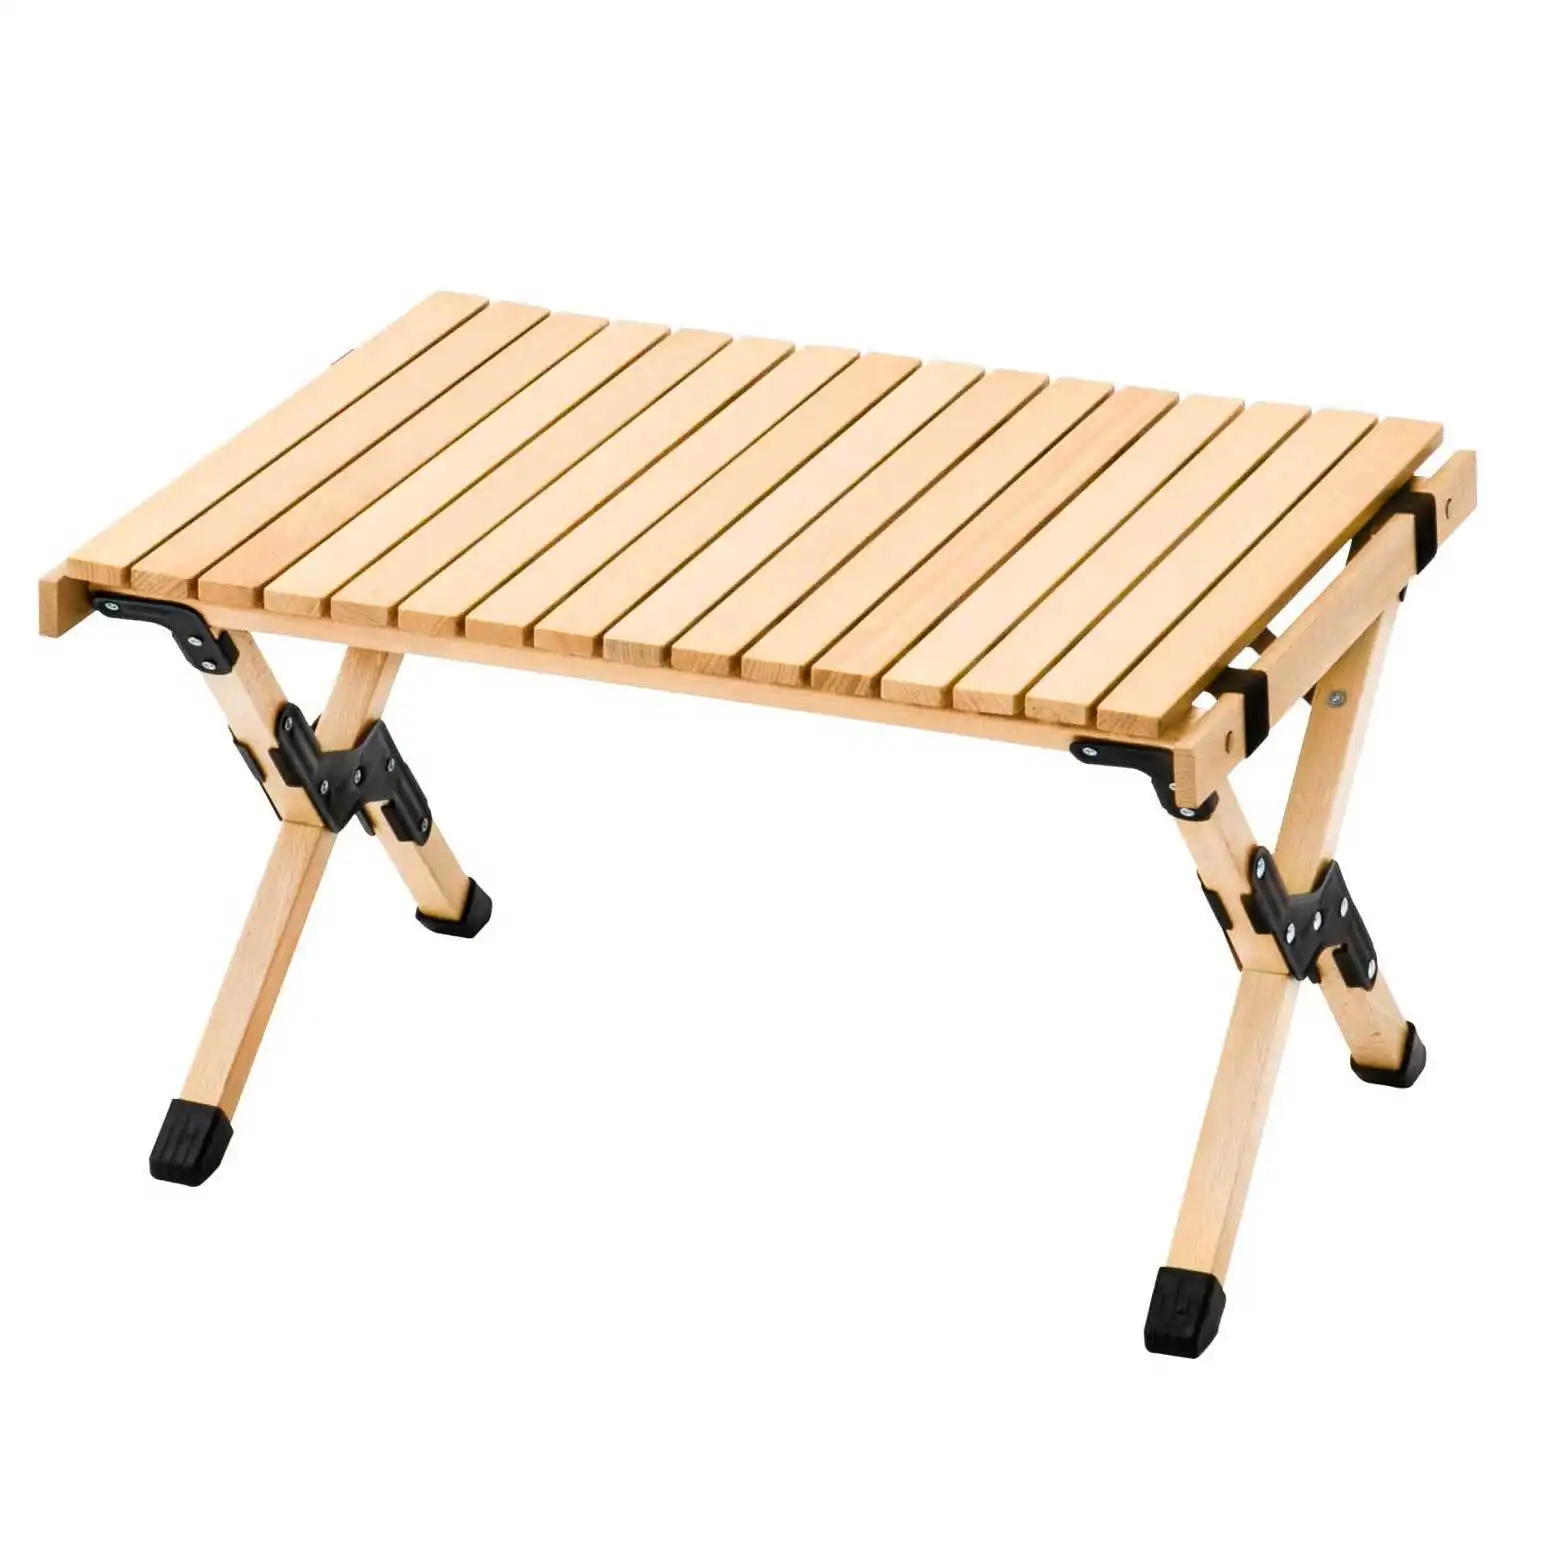 HOT SALE - Wooden Egg Roll Table - wholesale Outdoor Folding table for picnic - solid wood garden furniture